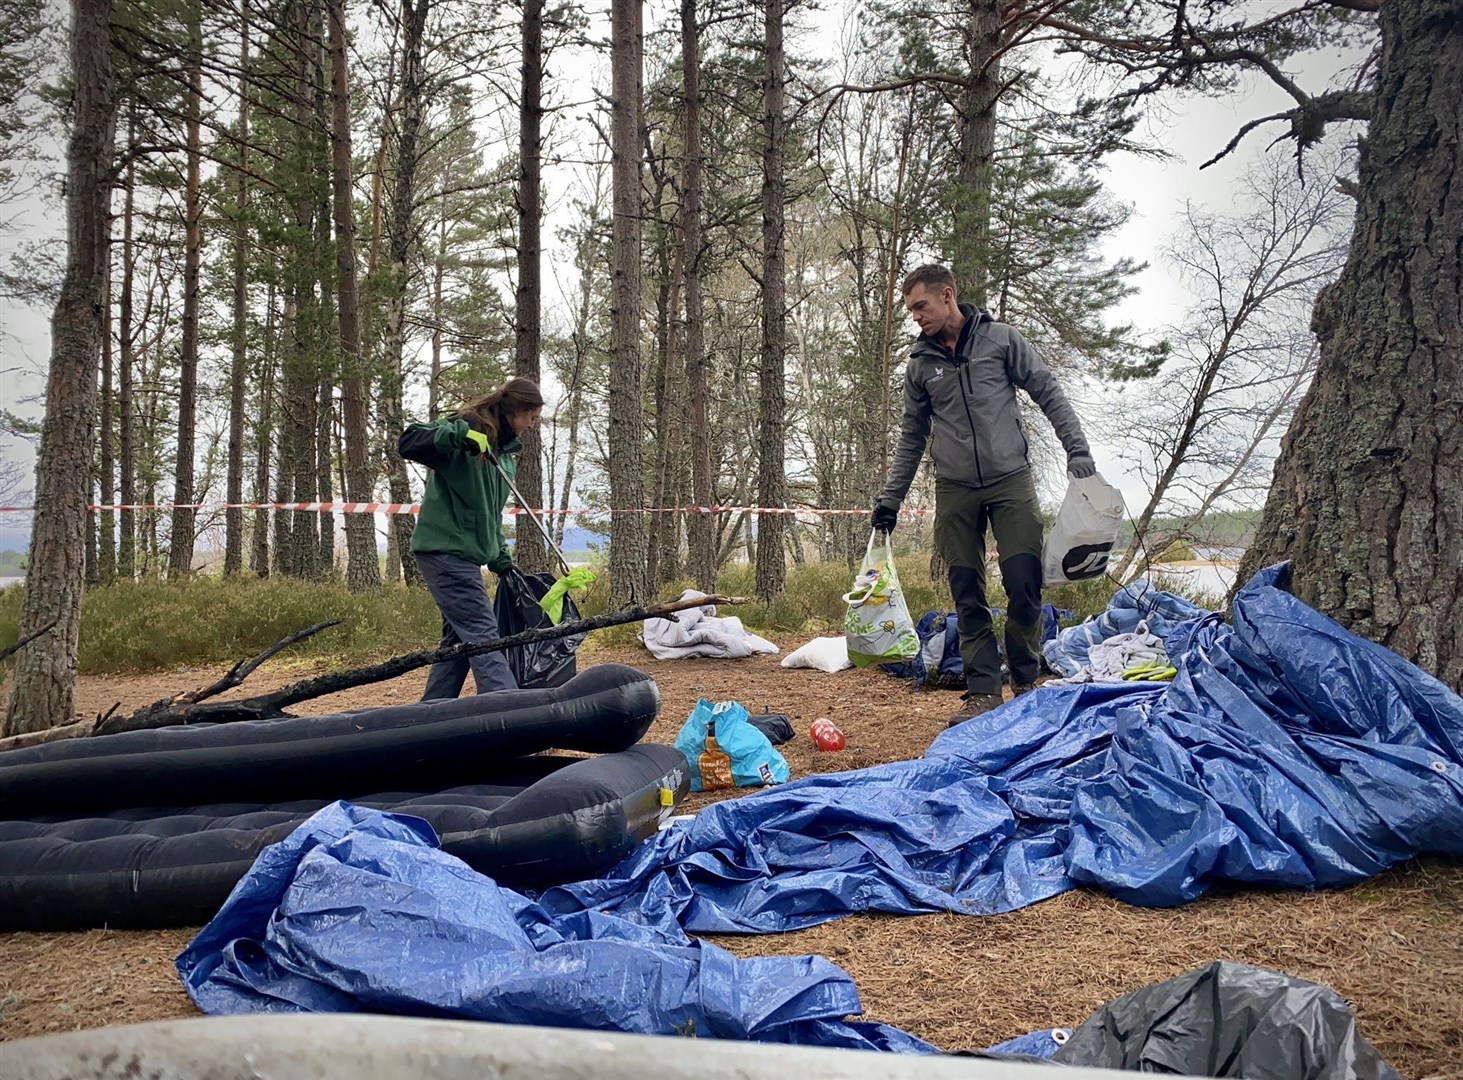 CNPA Rangers get to work clearing the dirty campers' rubbish at Loch Morlich